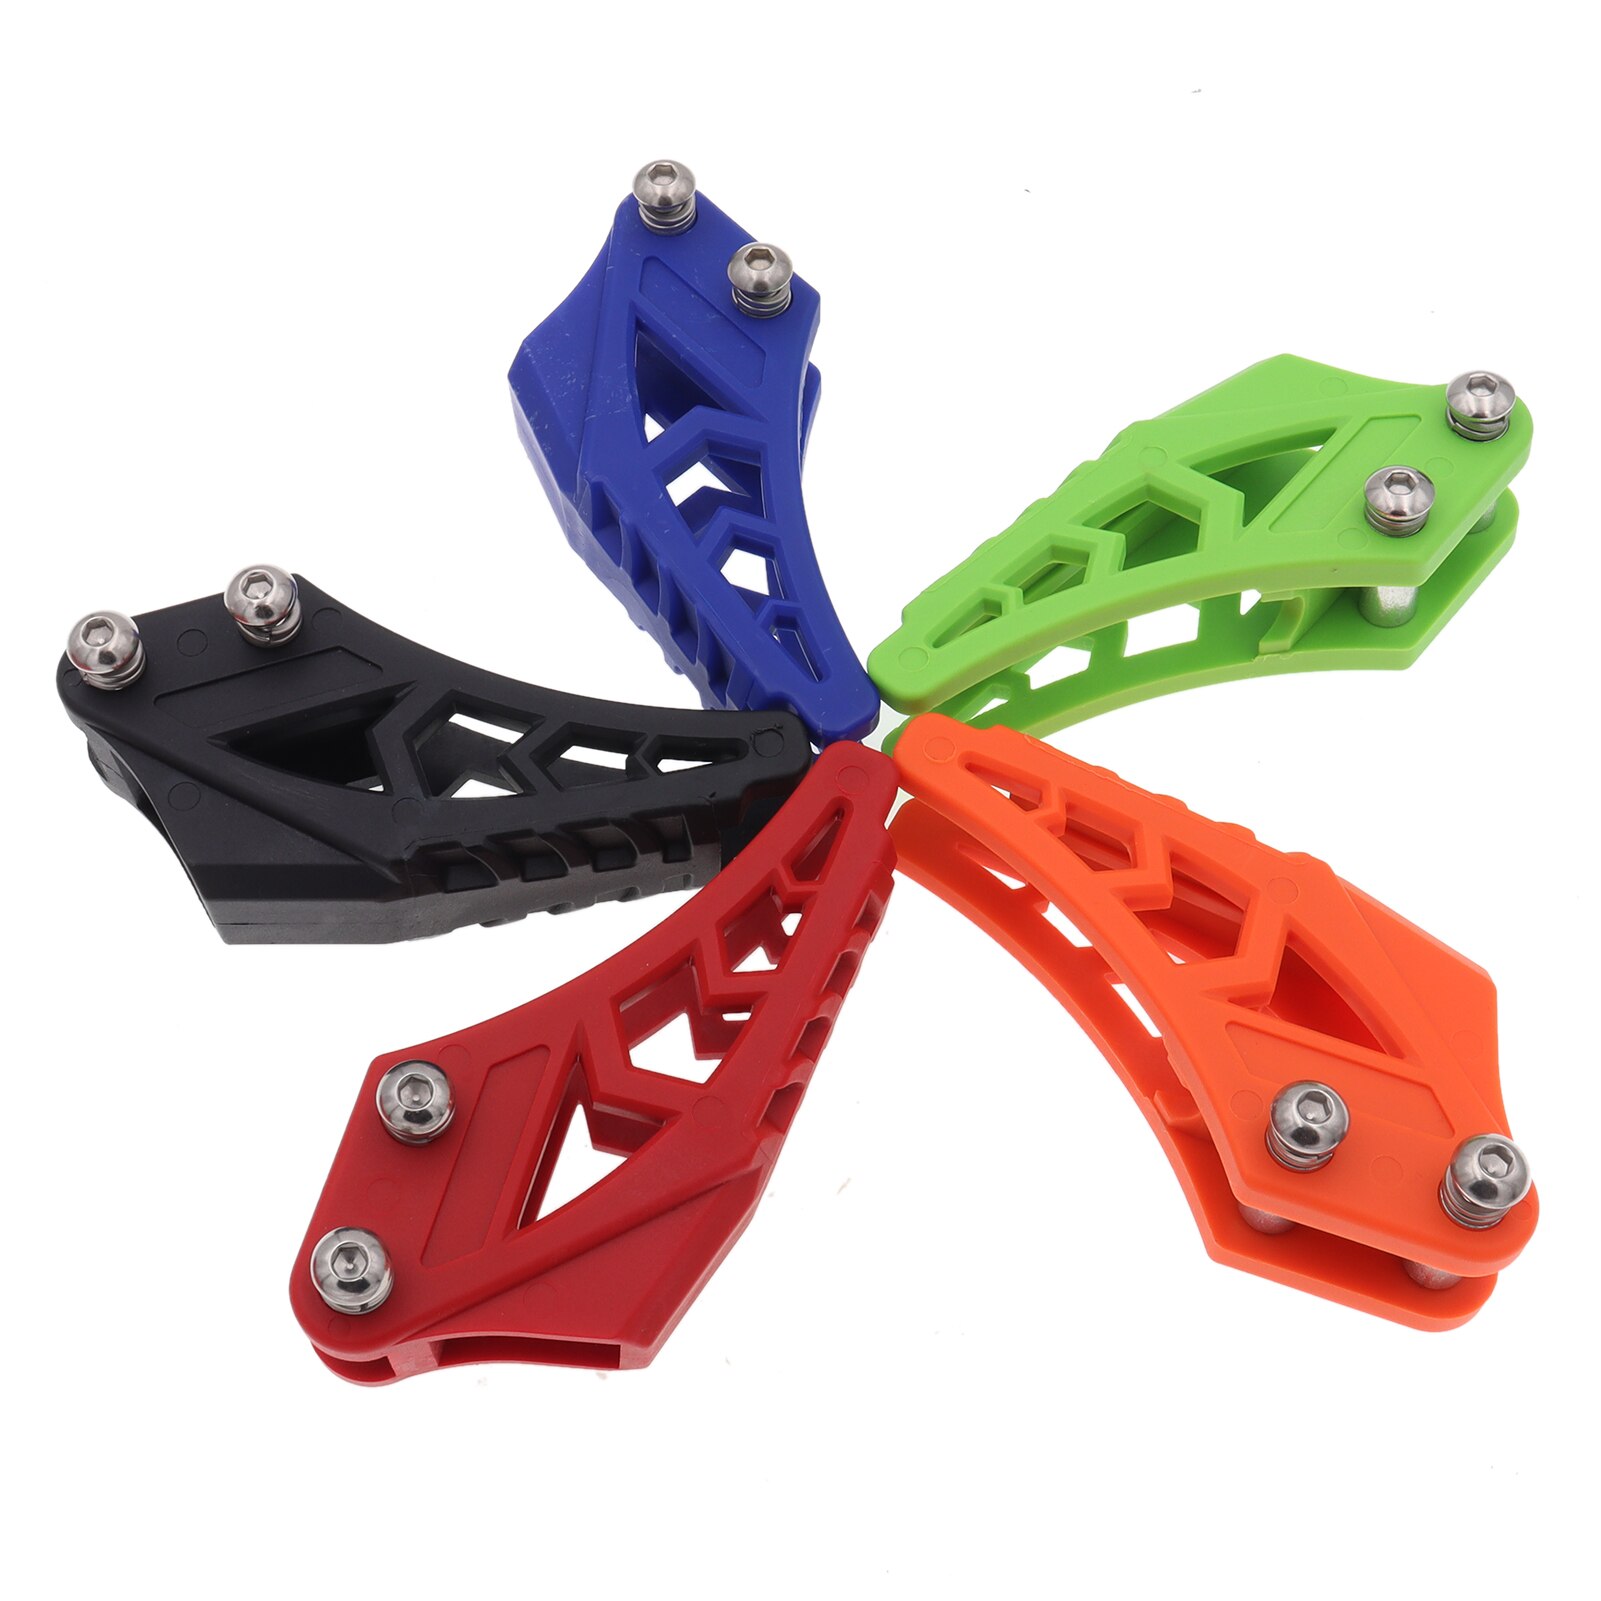 Chain Guide Guard Collectie Fit Crf 250 R Exc Yzf Kxf Mx Bse Bosuer Dirt Pit Bike Abm Xmotos star Wars